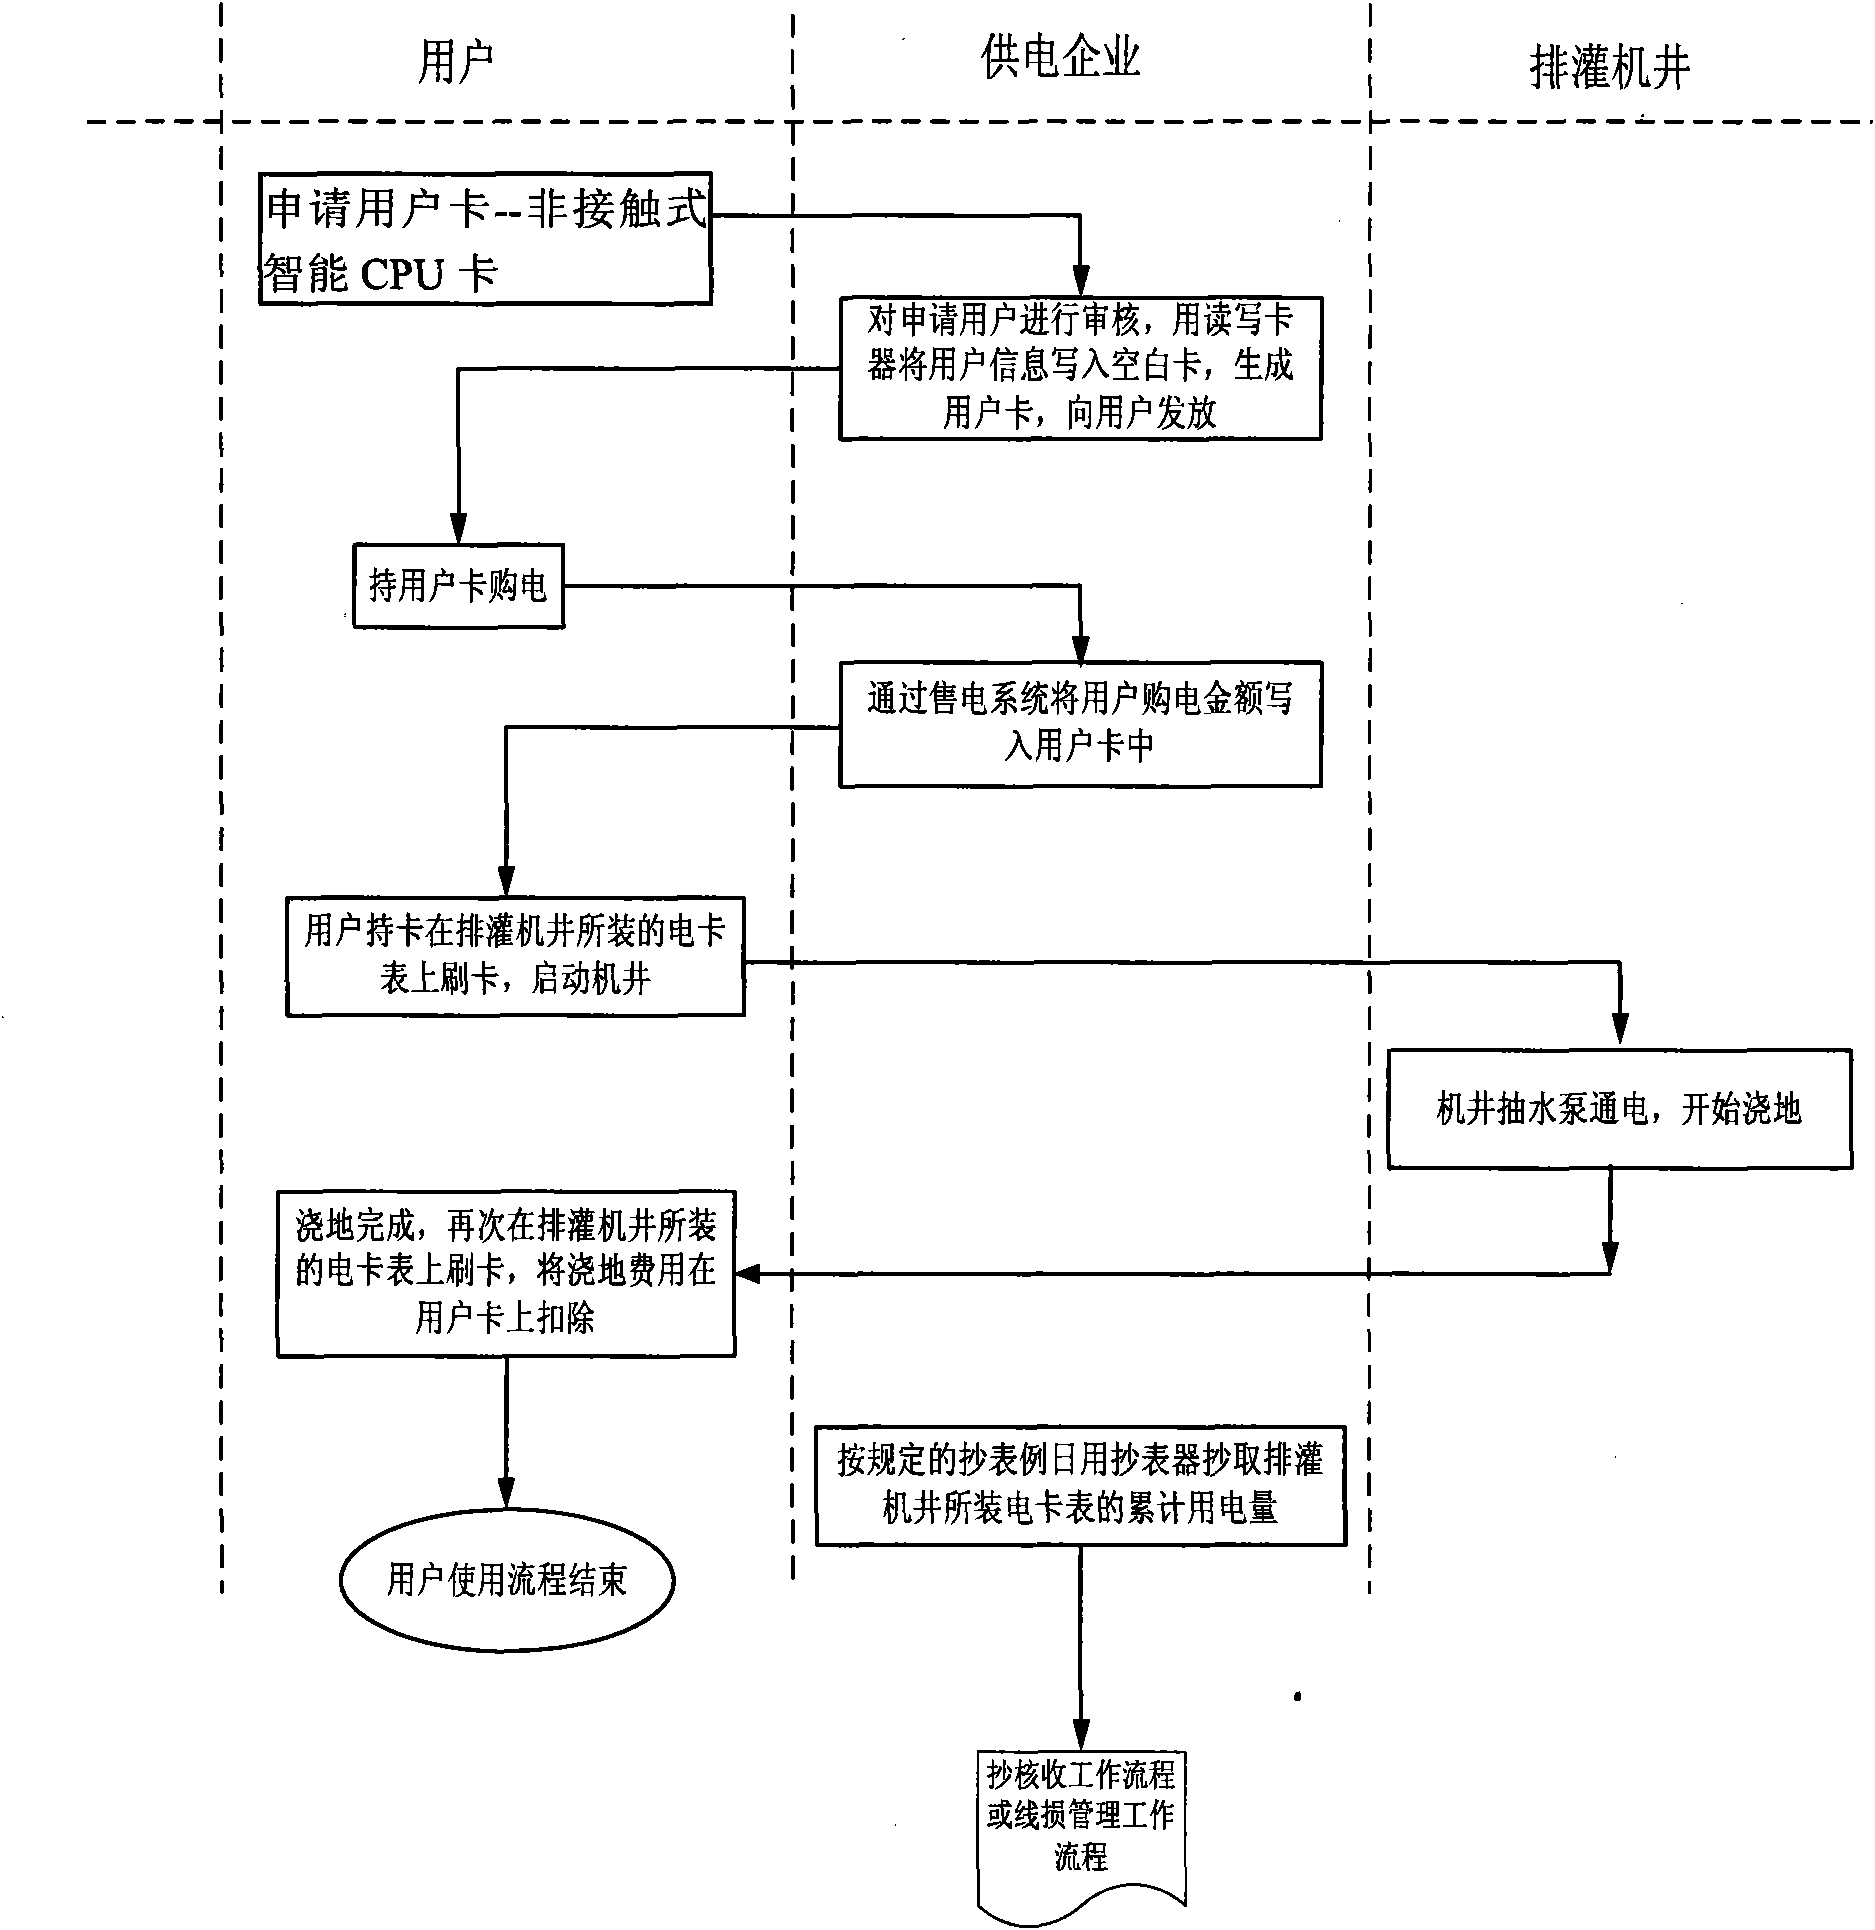 System for measuring and managing electric energy used for agricultural irrigation and drainage